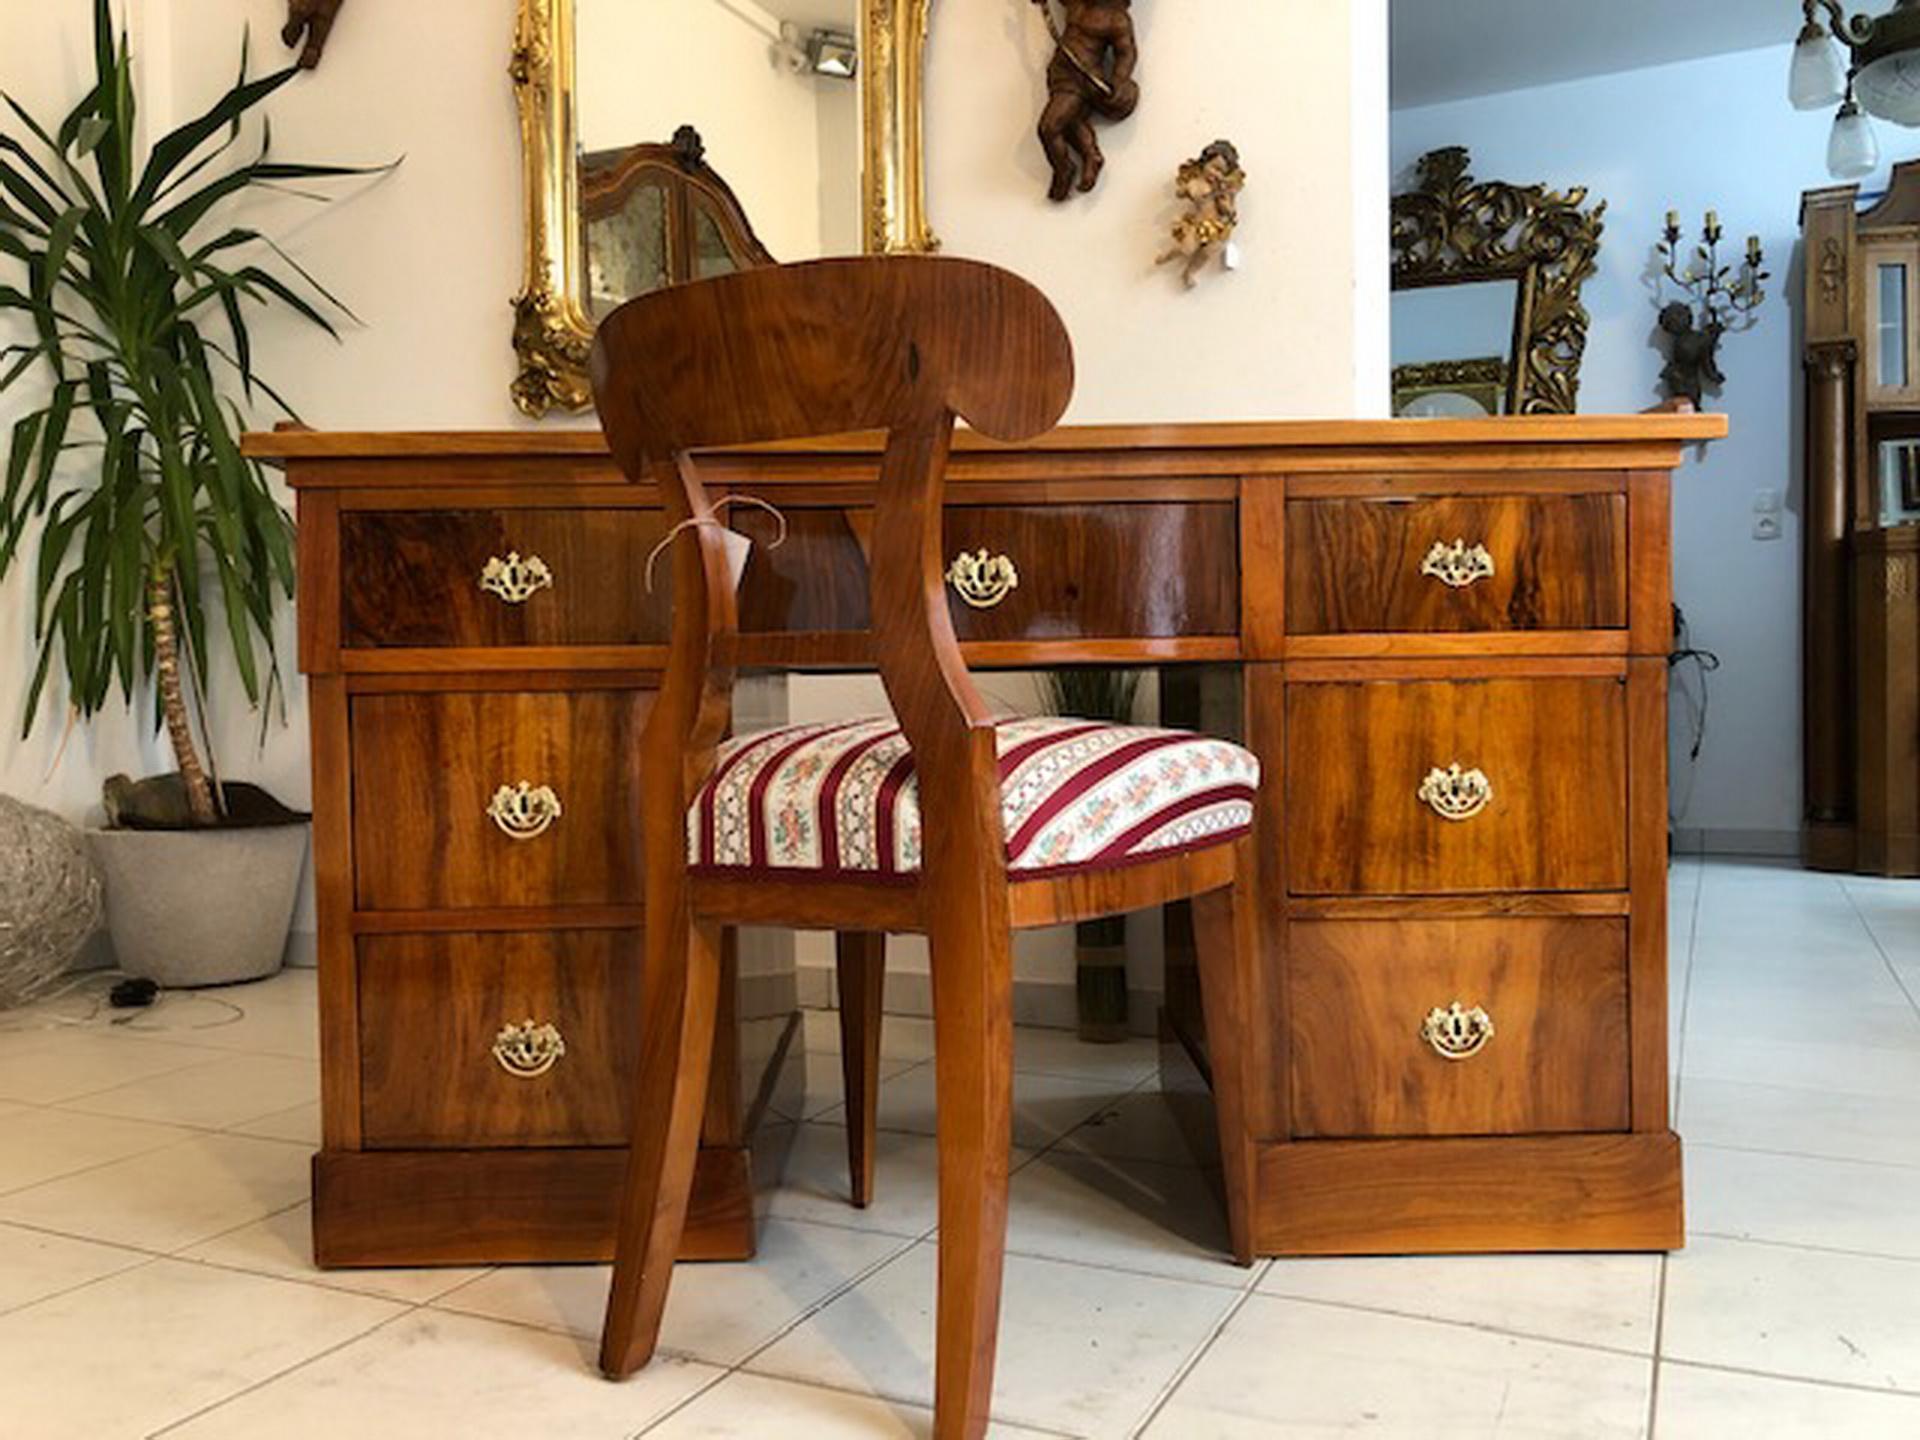 This is a beautiful, recently restored desk from the time of the late Biedermeier which can be placed everywhere in the room. This secretary is an eyecatcher in your office, with seven well working drawers, as well as a very pretty burl veneer grain